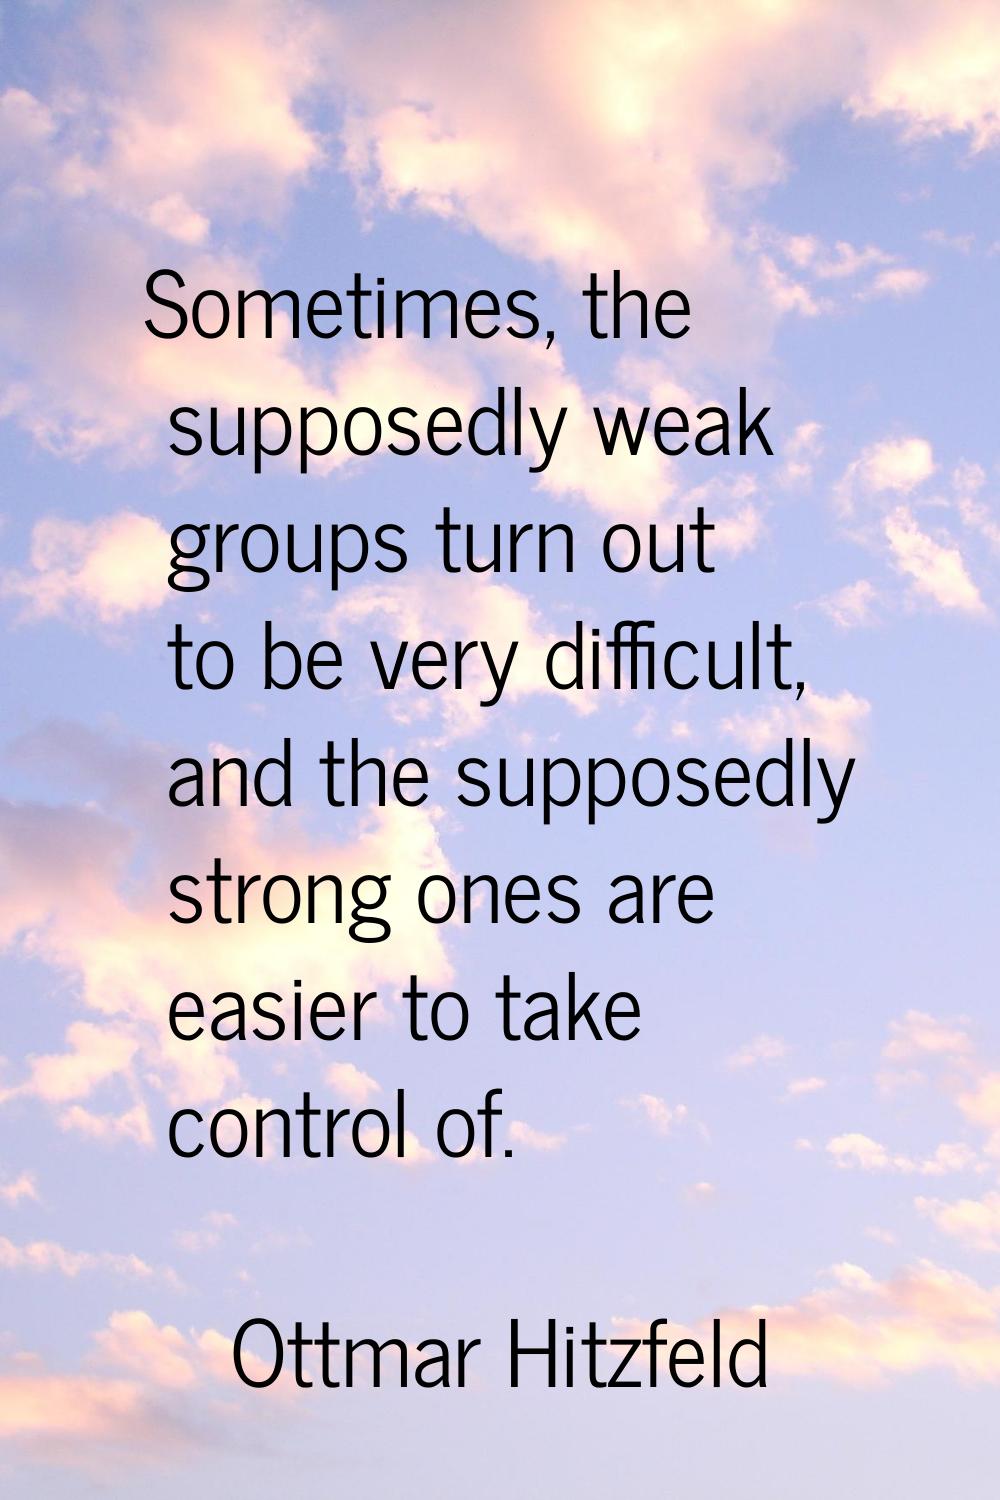 Sometimes, the supposedly weak groups turn out to be very difficult, and the supposedly strong ones